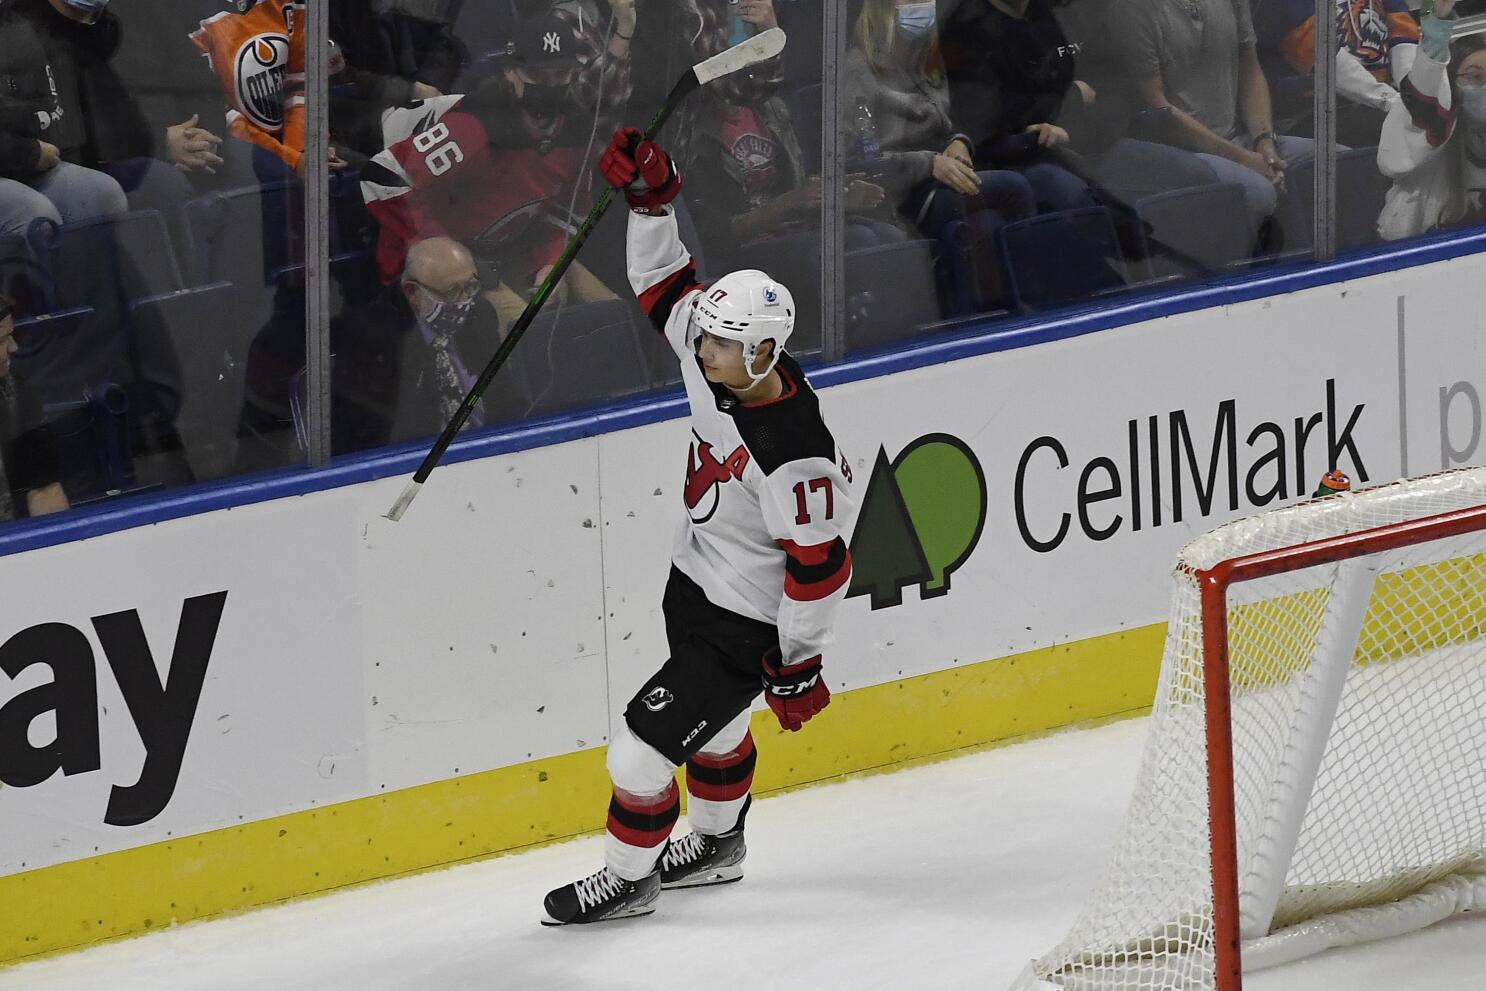 Yegor Sharangovich scores first NHL goal to lift Devils in OT